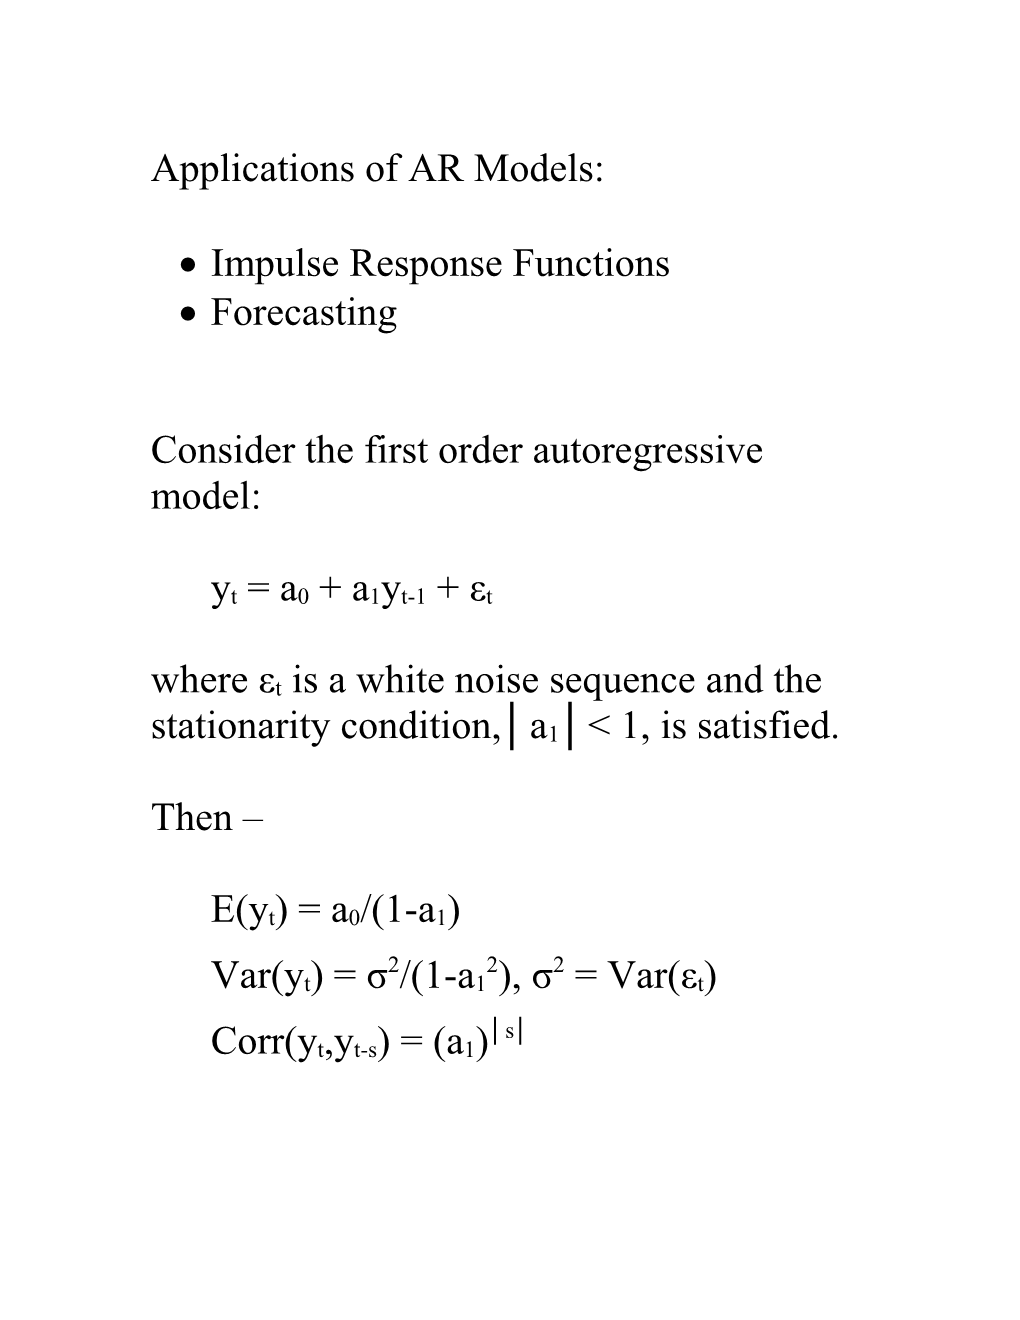 Impulse Response Functions, Forecasting with AR and VAR Models